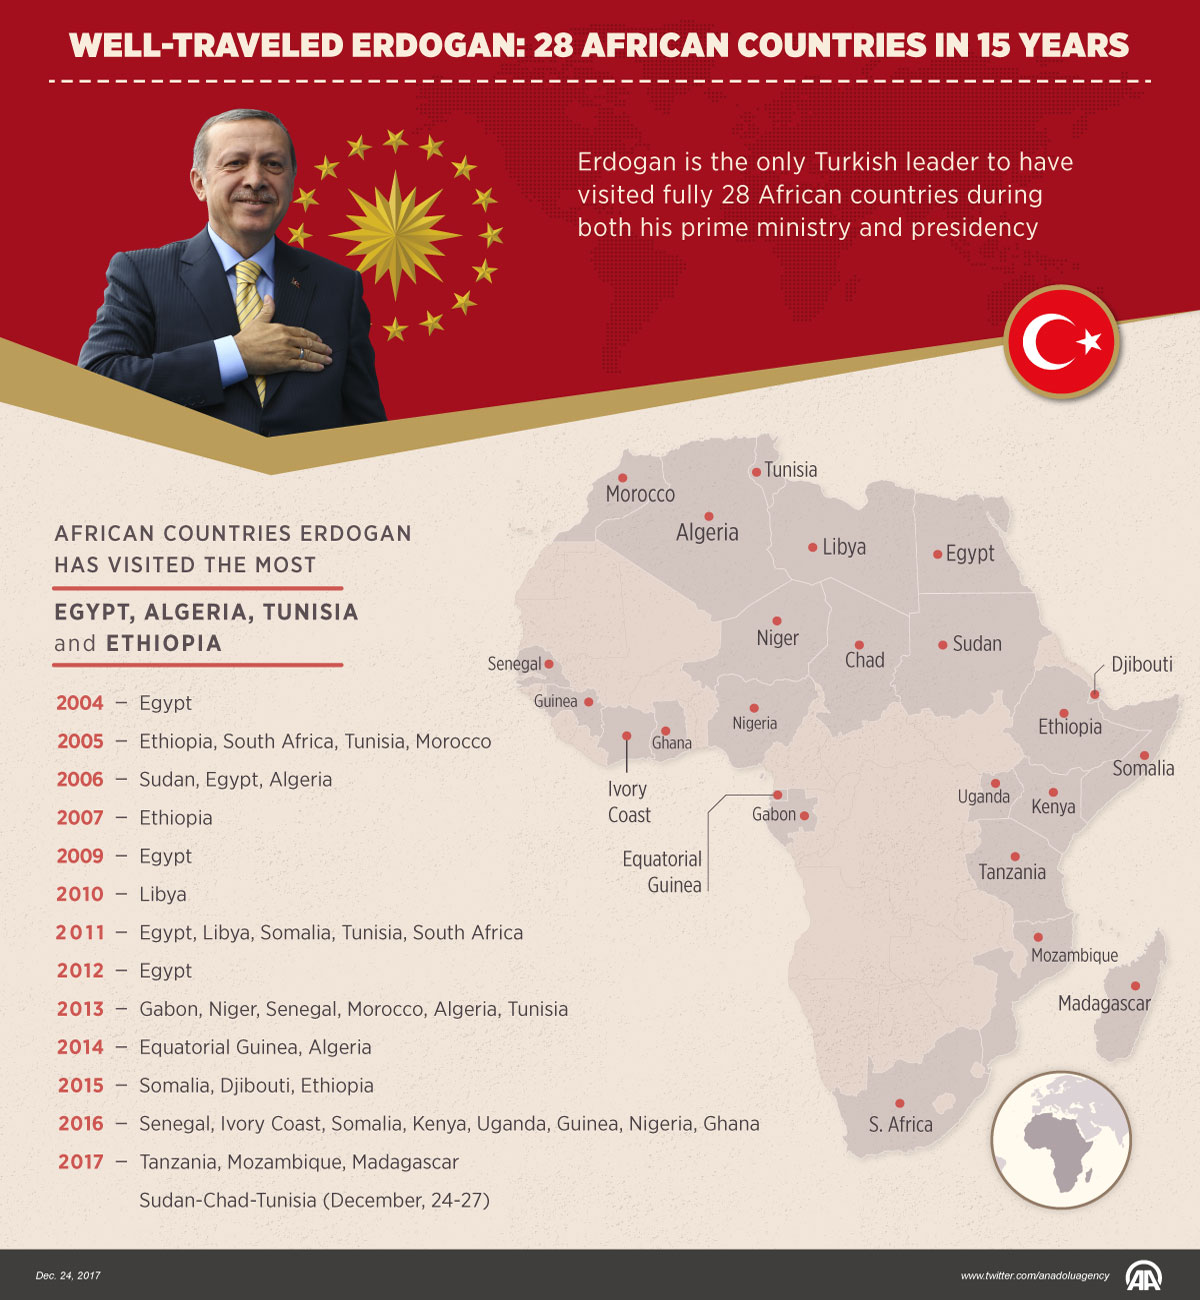 Well-traveled Erdogan: 28 African countries in 15 years